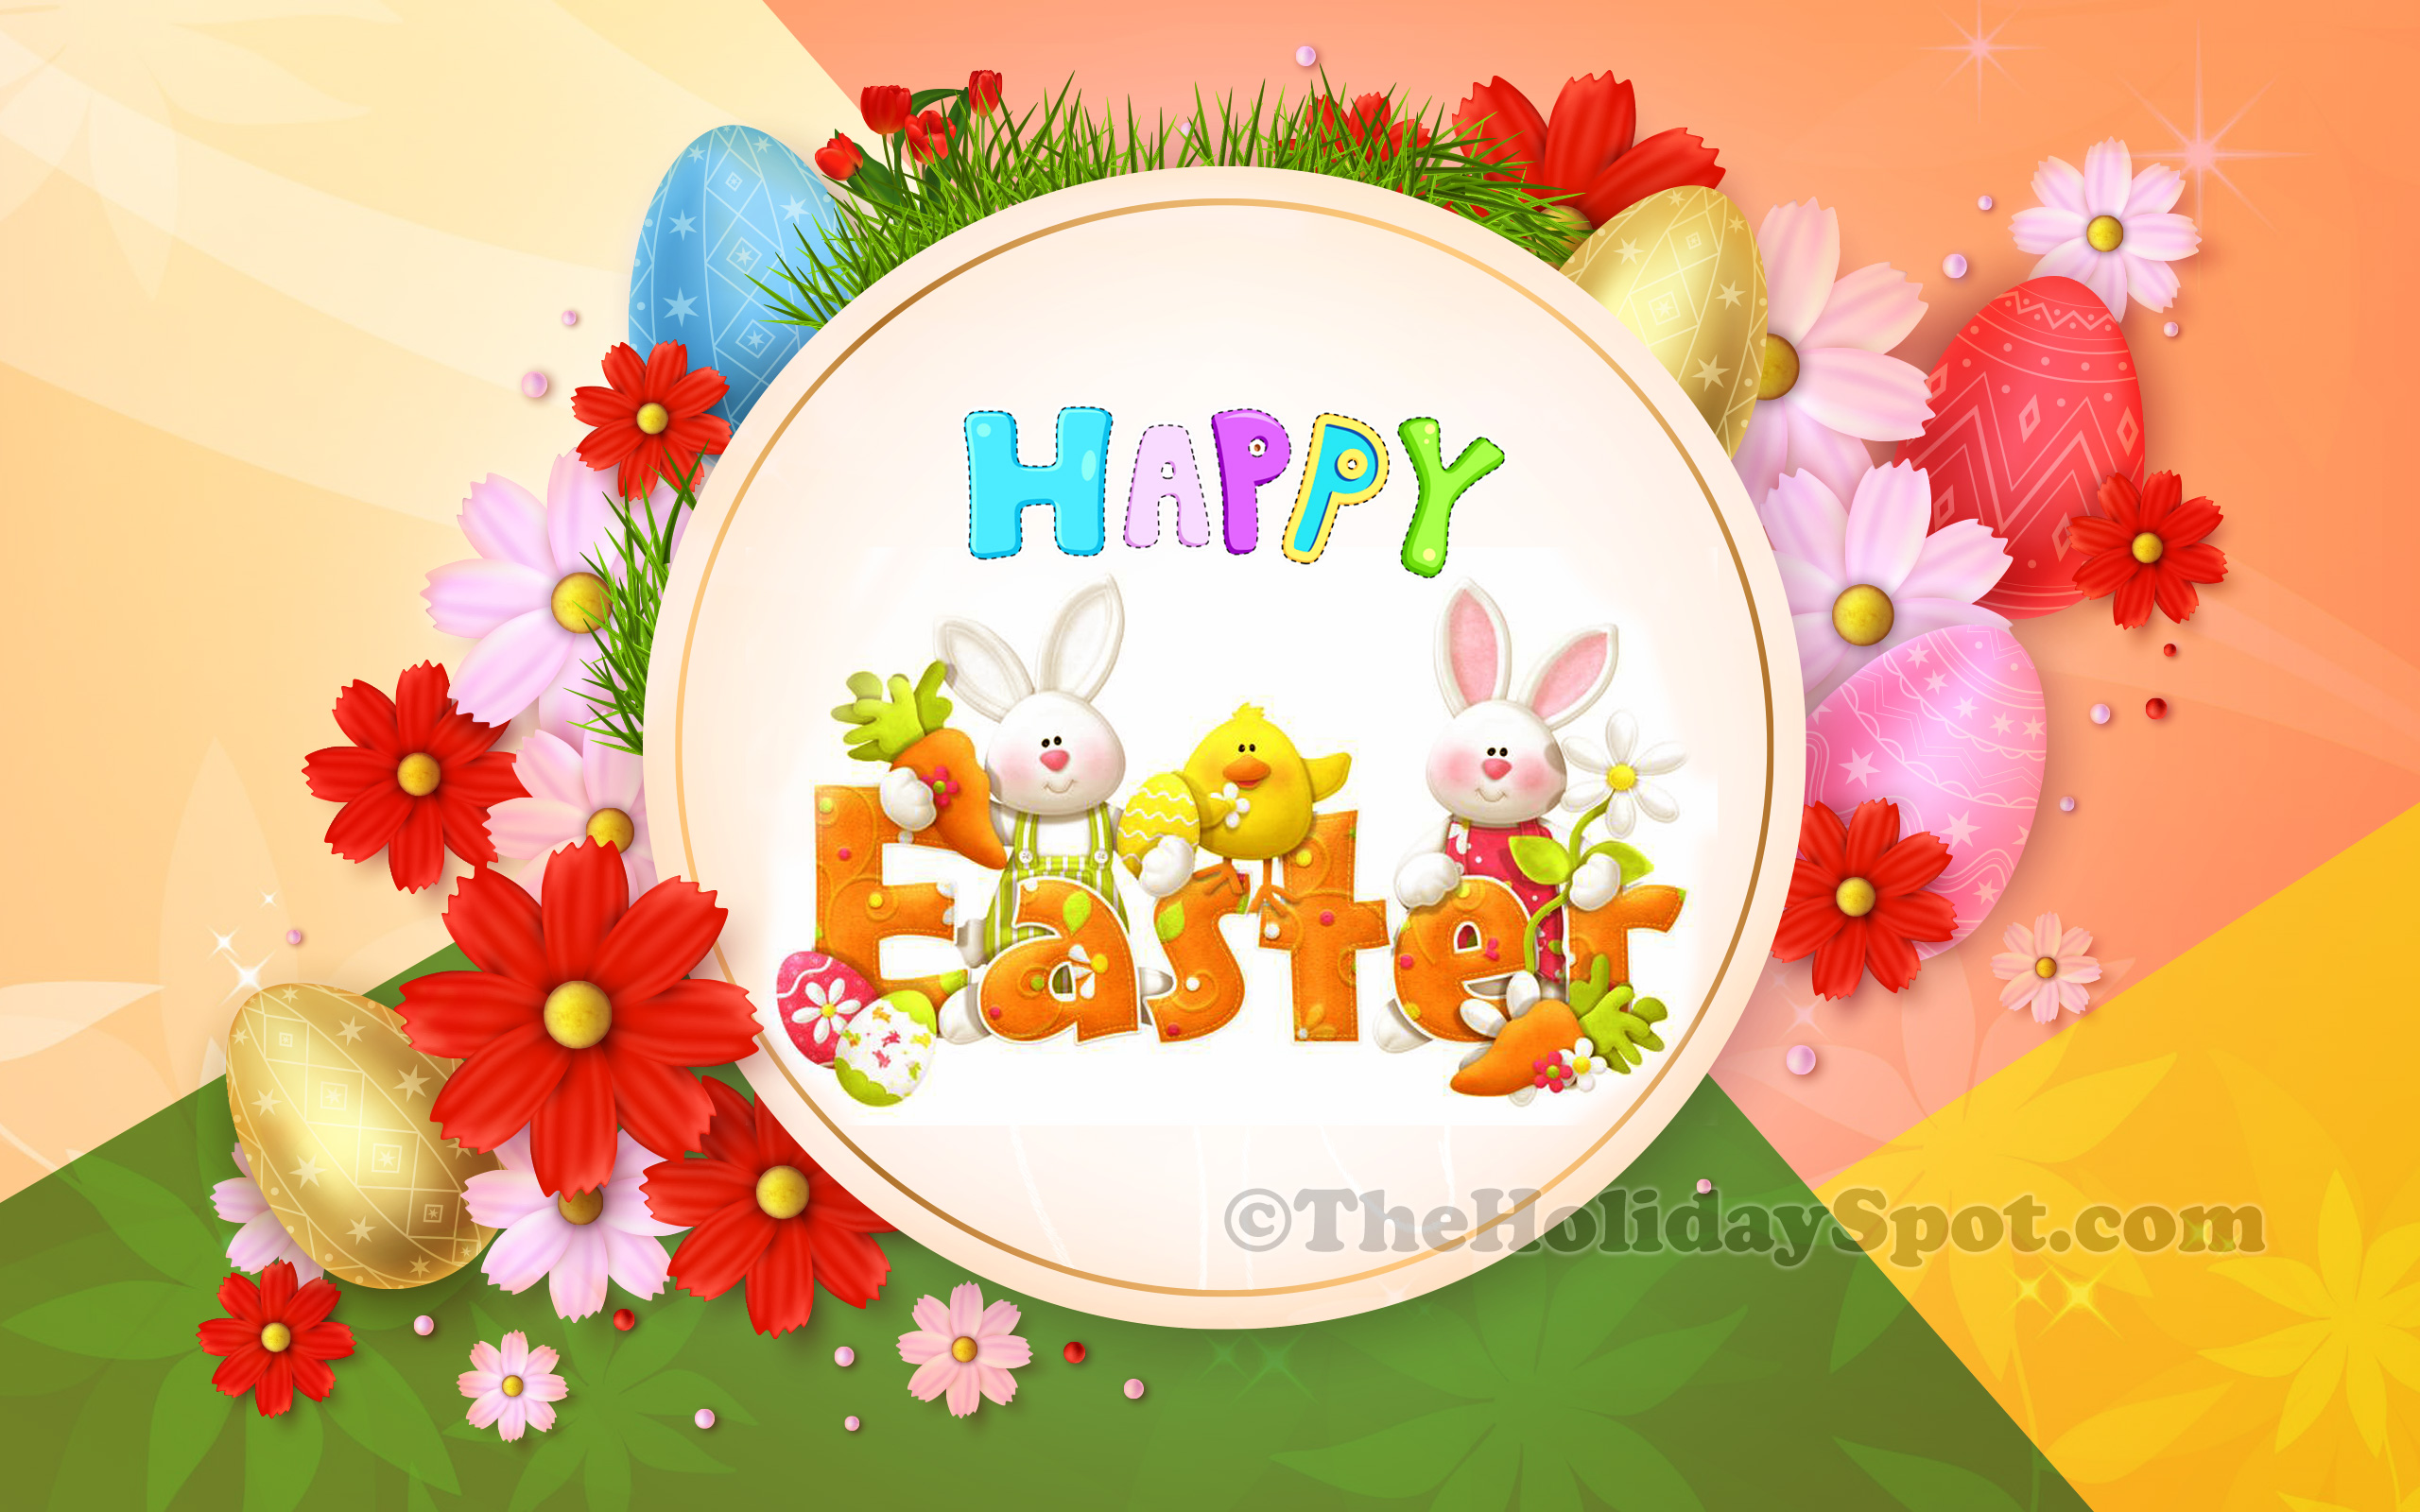 Happy Easter Wallpapers Free Cute Easter Wallpapers Easter Pictures